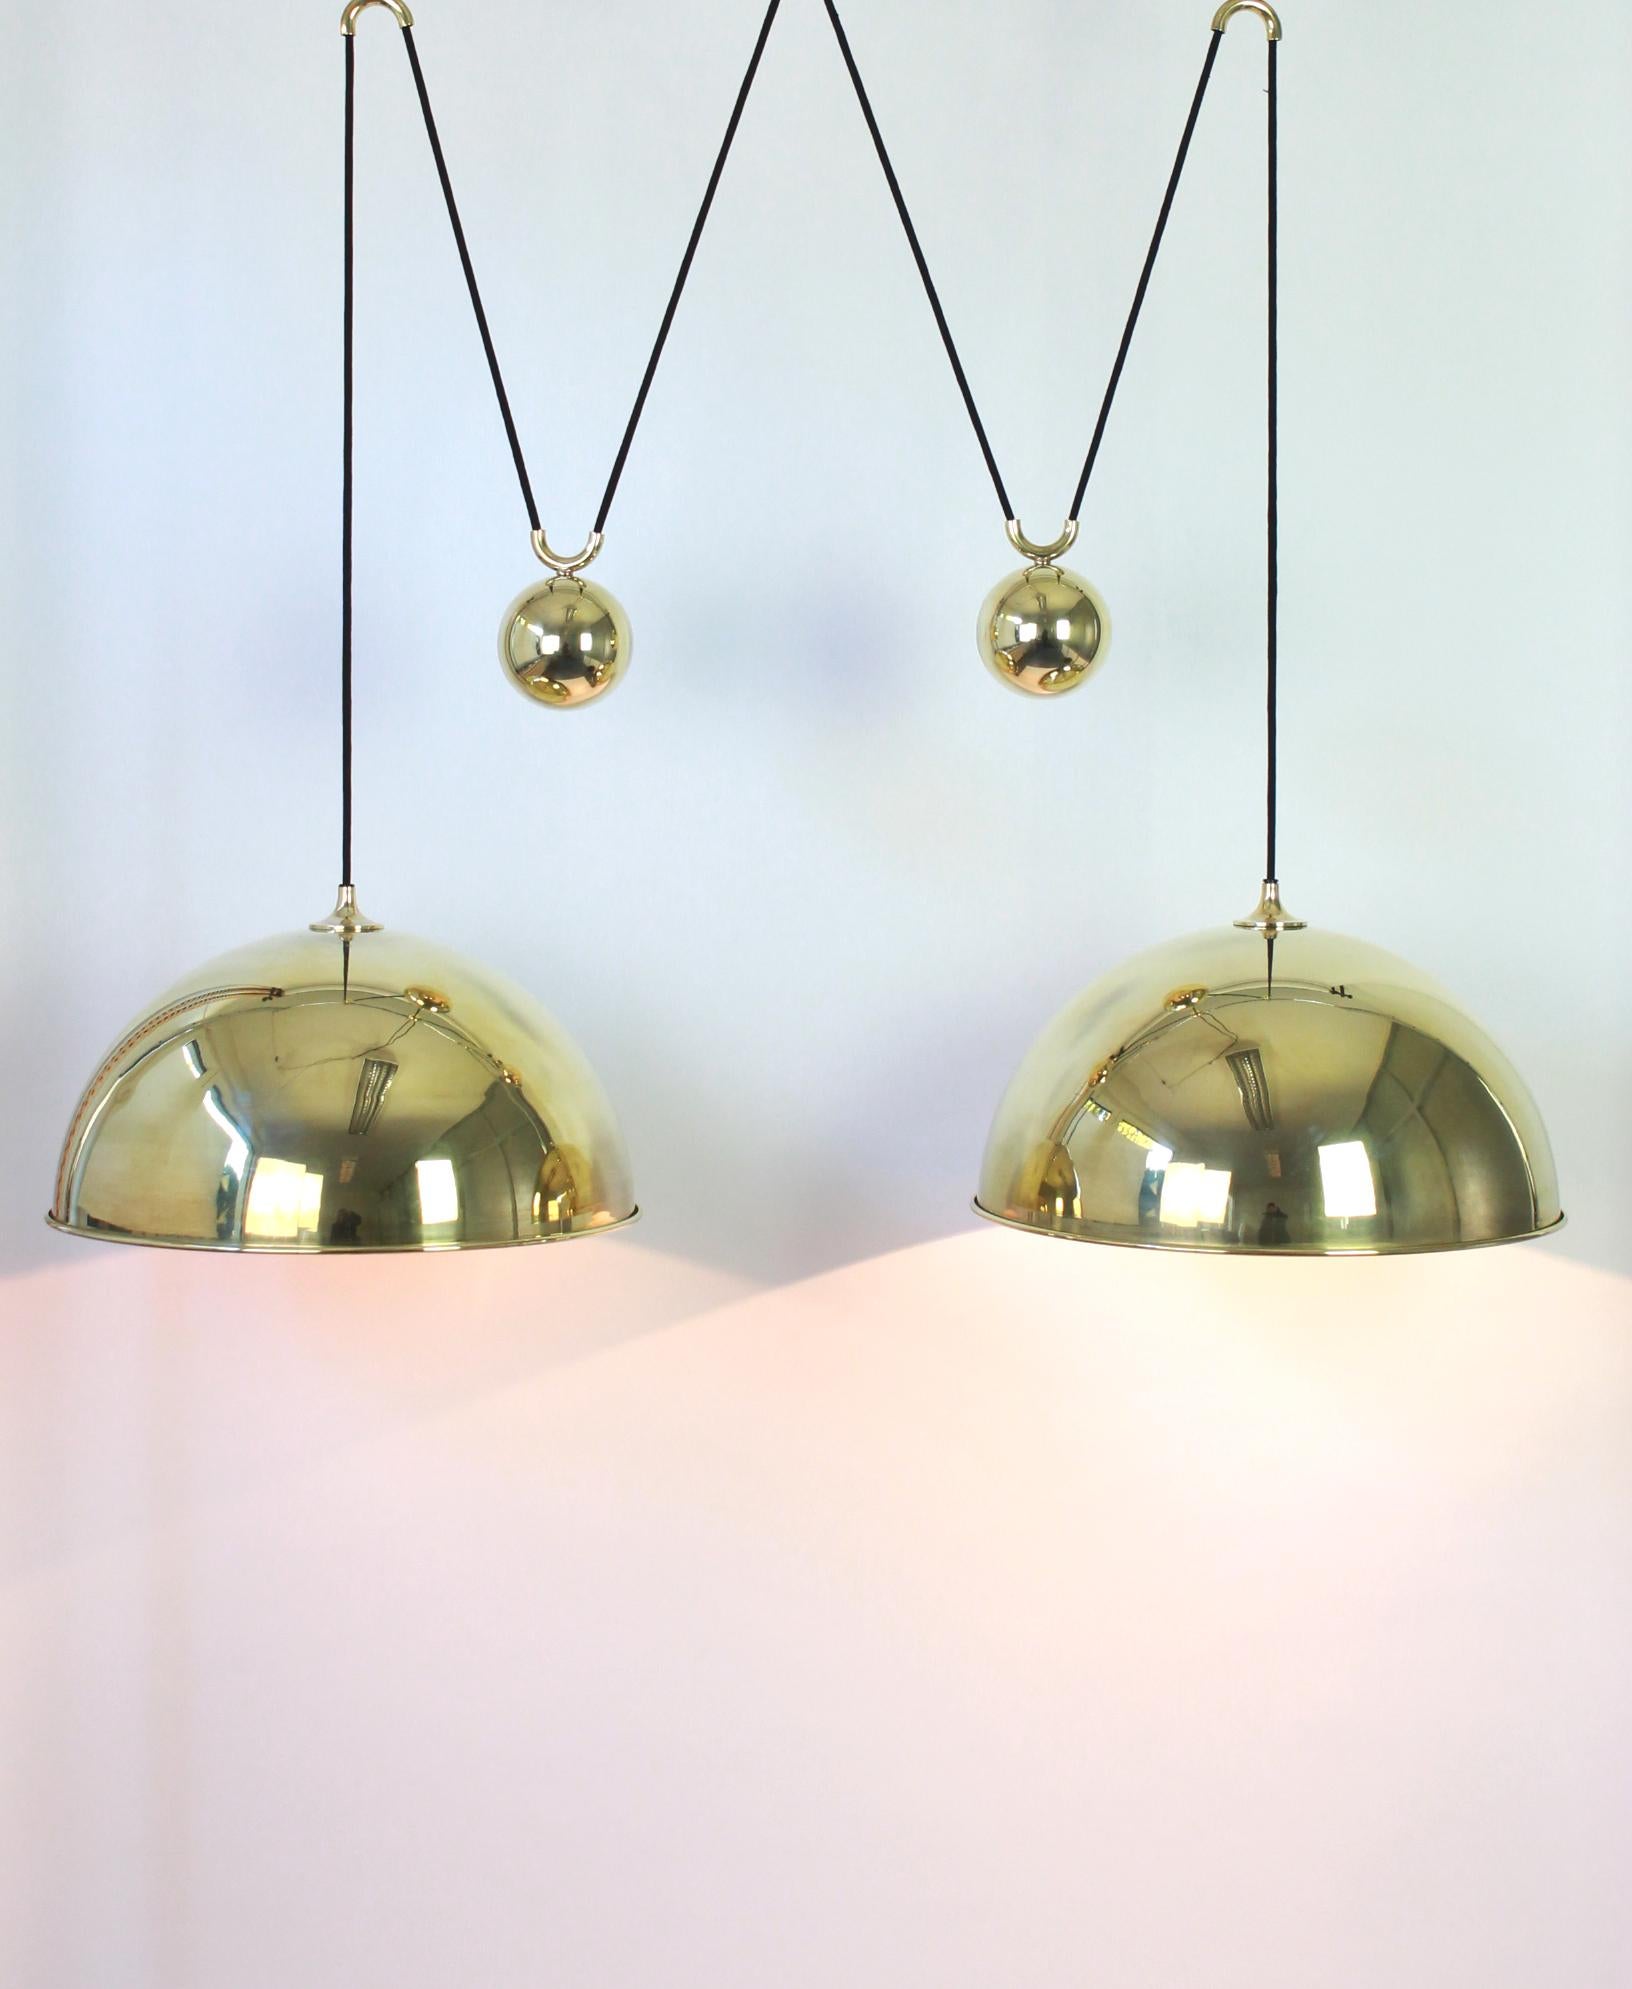 German Stunning Double Brass Pendant with Adjustable Counter Weights by Florian Schulz